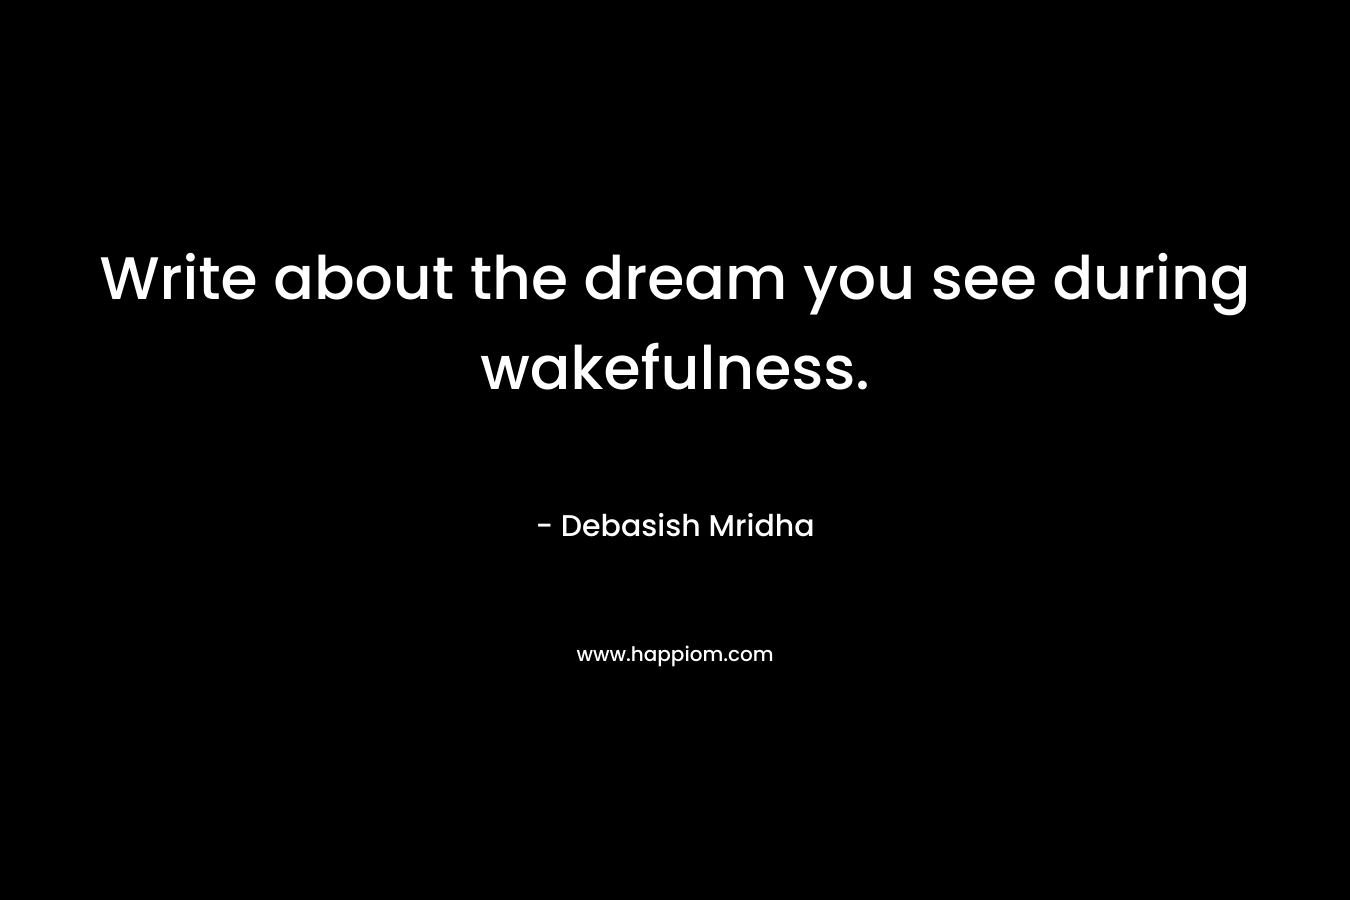 Write about the dream you see during wakefulness.